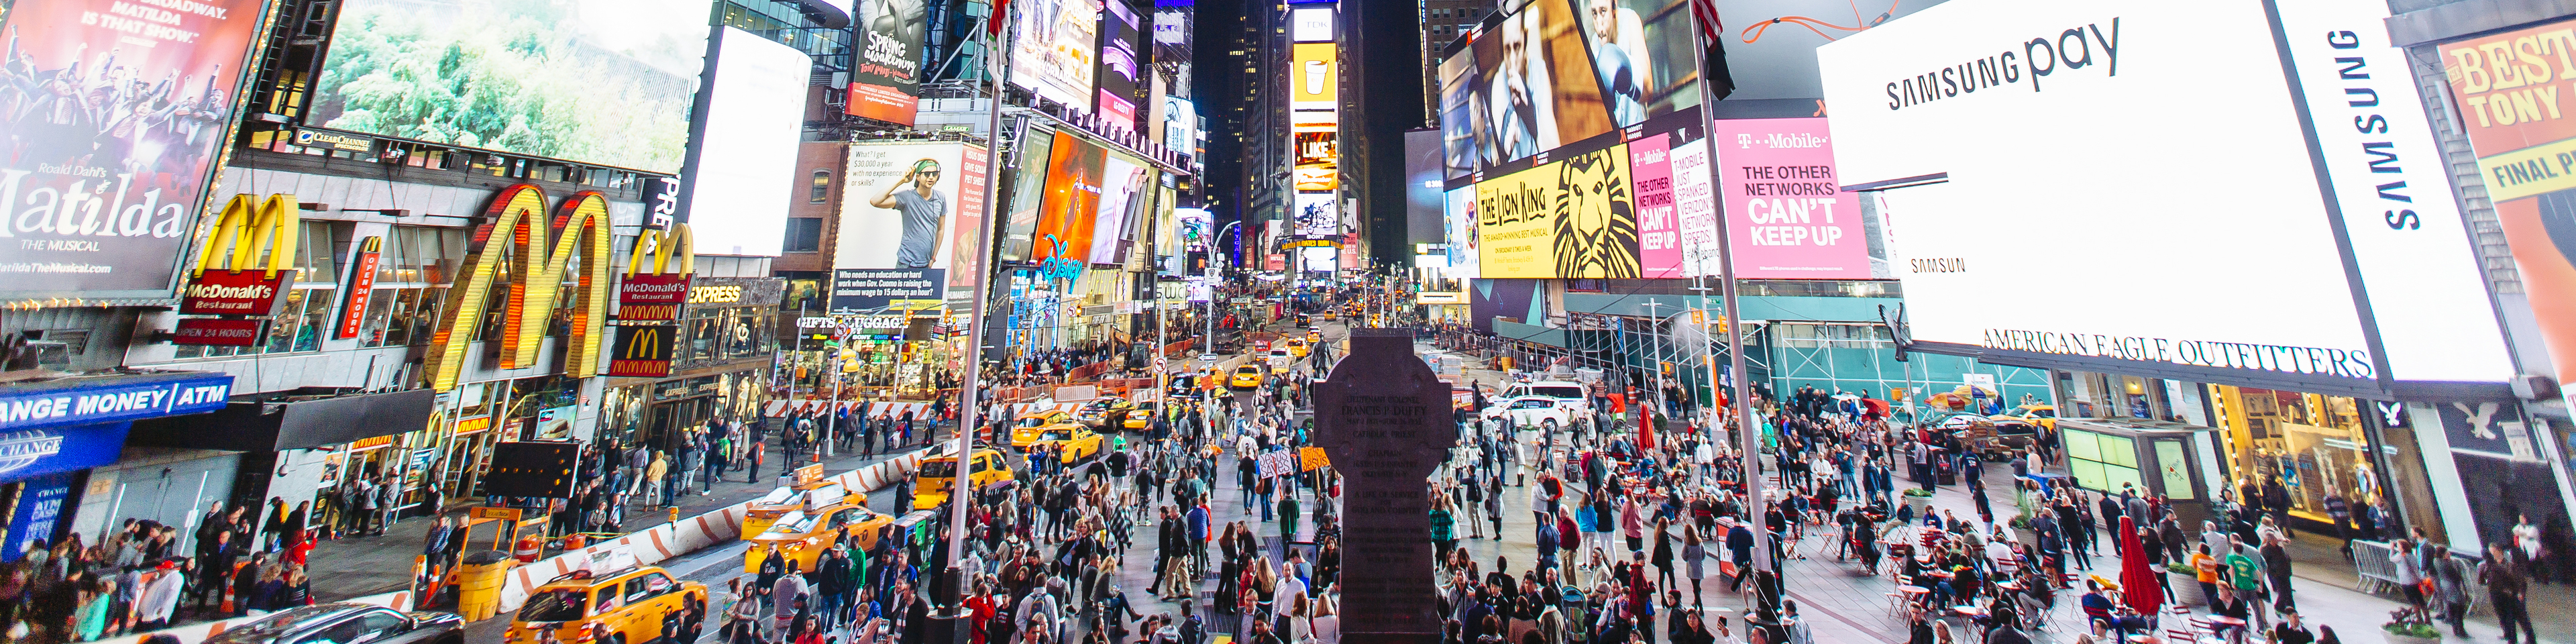 Times Square with illuminated billboards and advertisement at night, New York City, USA,